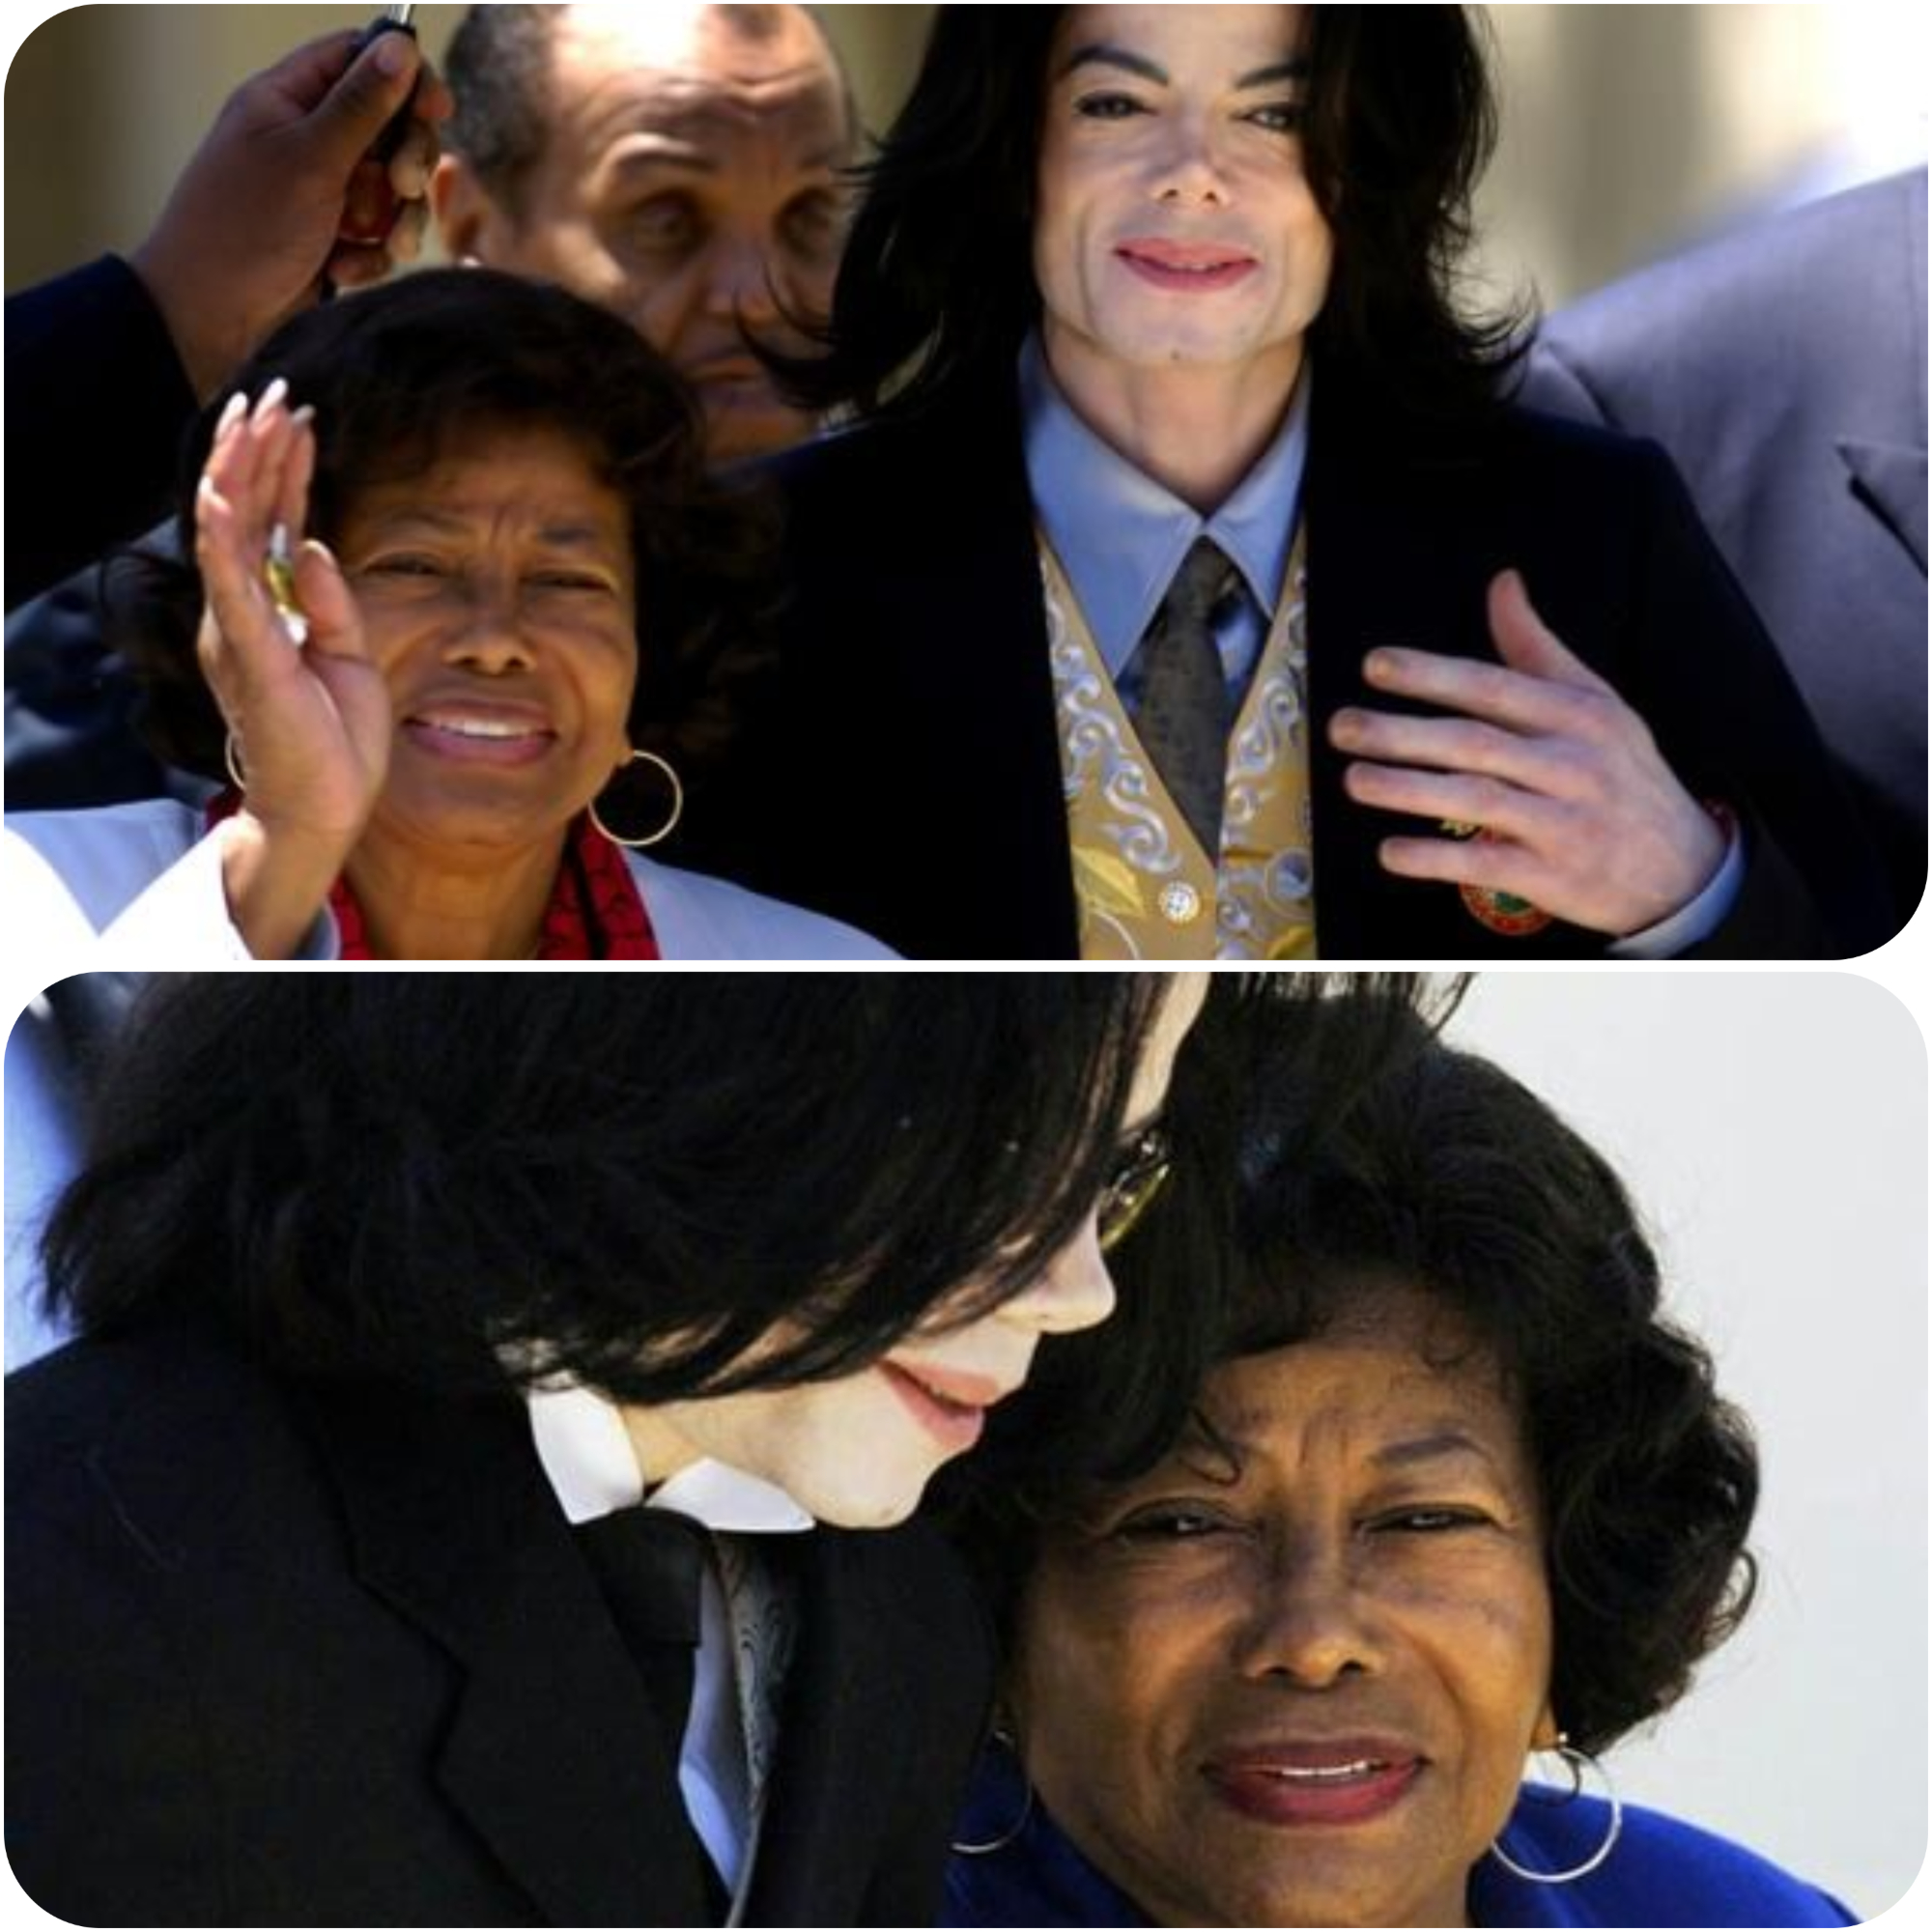 Pop icon Michael Jackson's legacy is heating up, but not in the way you might think. His mother, Katherine, is locked in a fierce legal battle